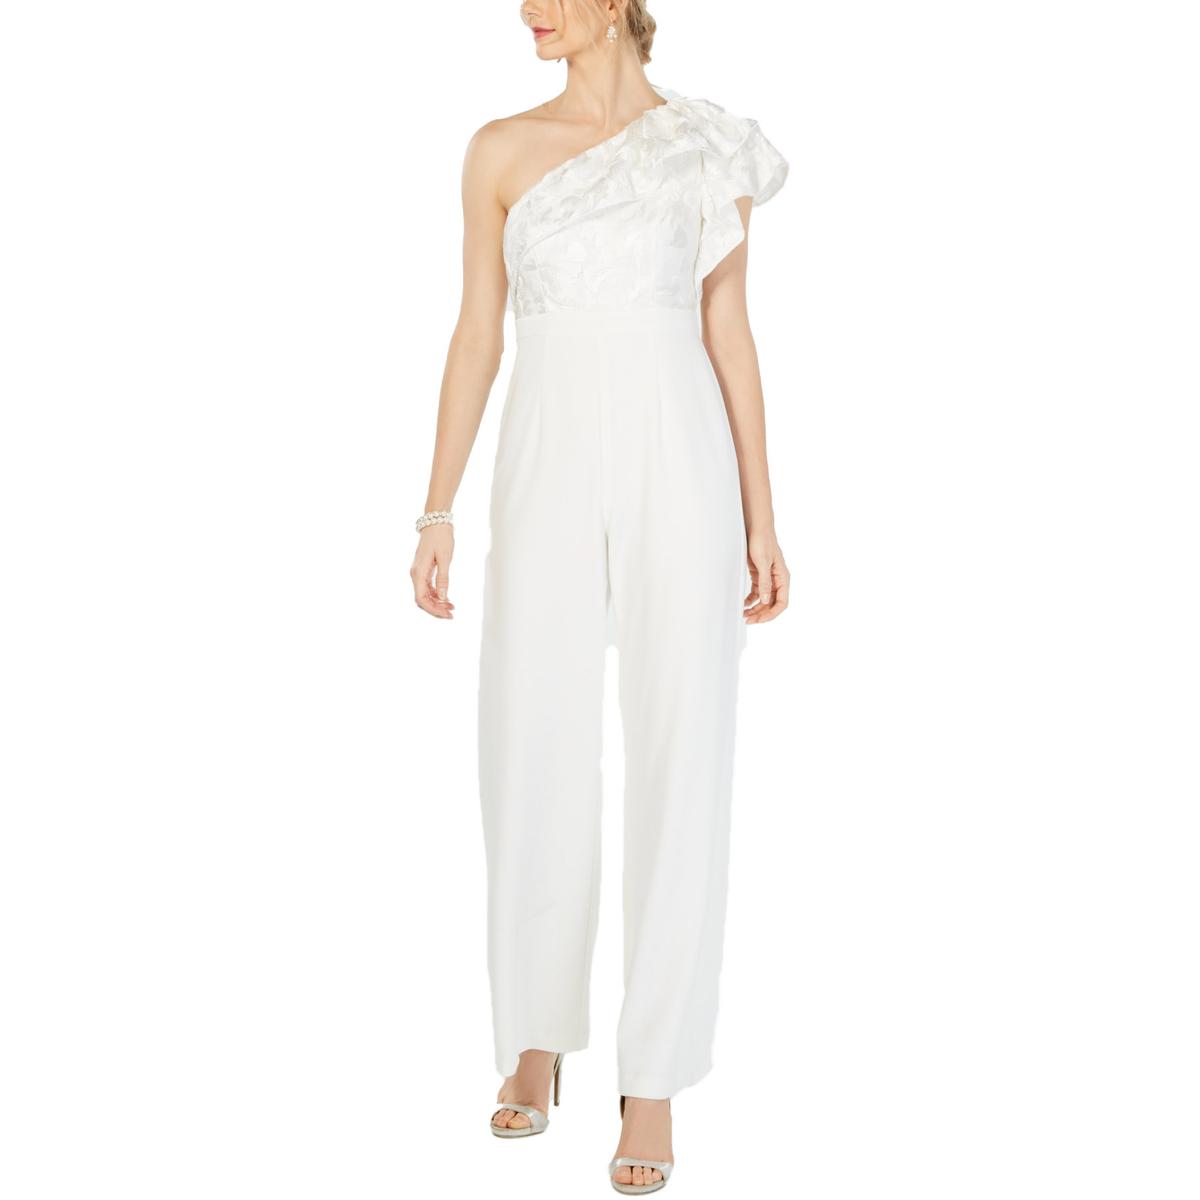 Adrianna Papell Womens Ivory One Shoulder Floral Lace Jumpsuit 14 BHFO ...